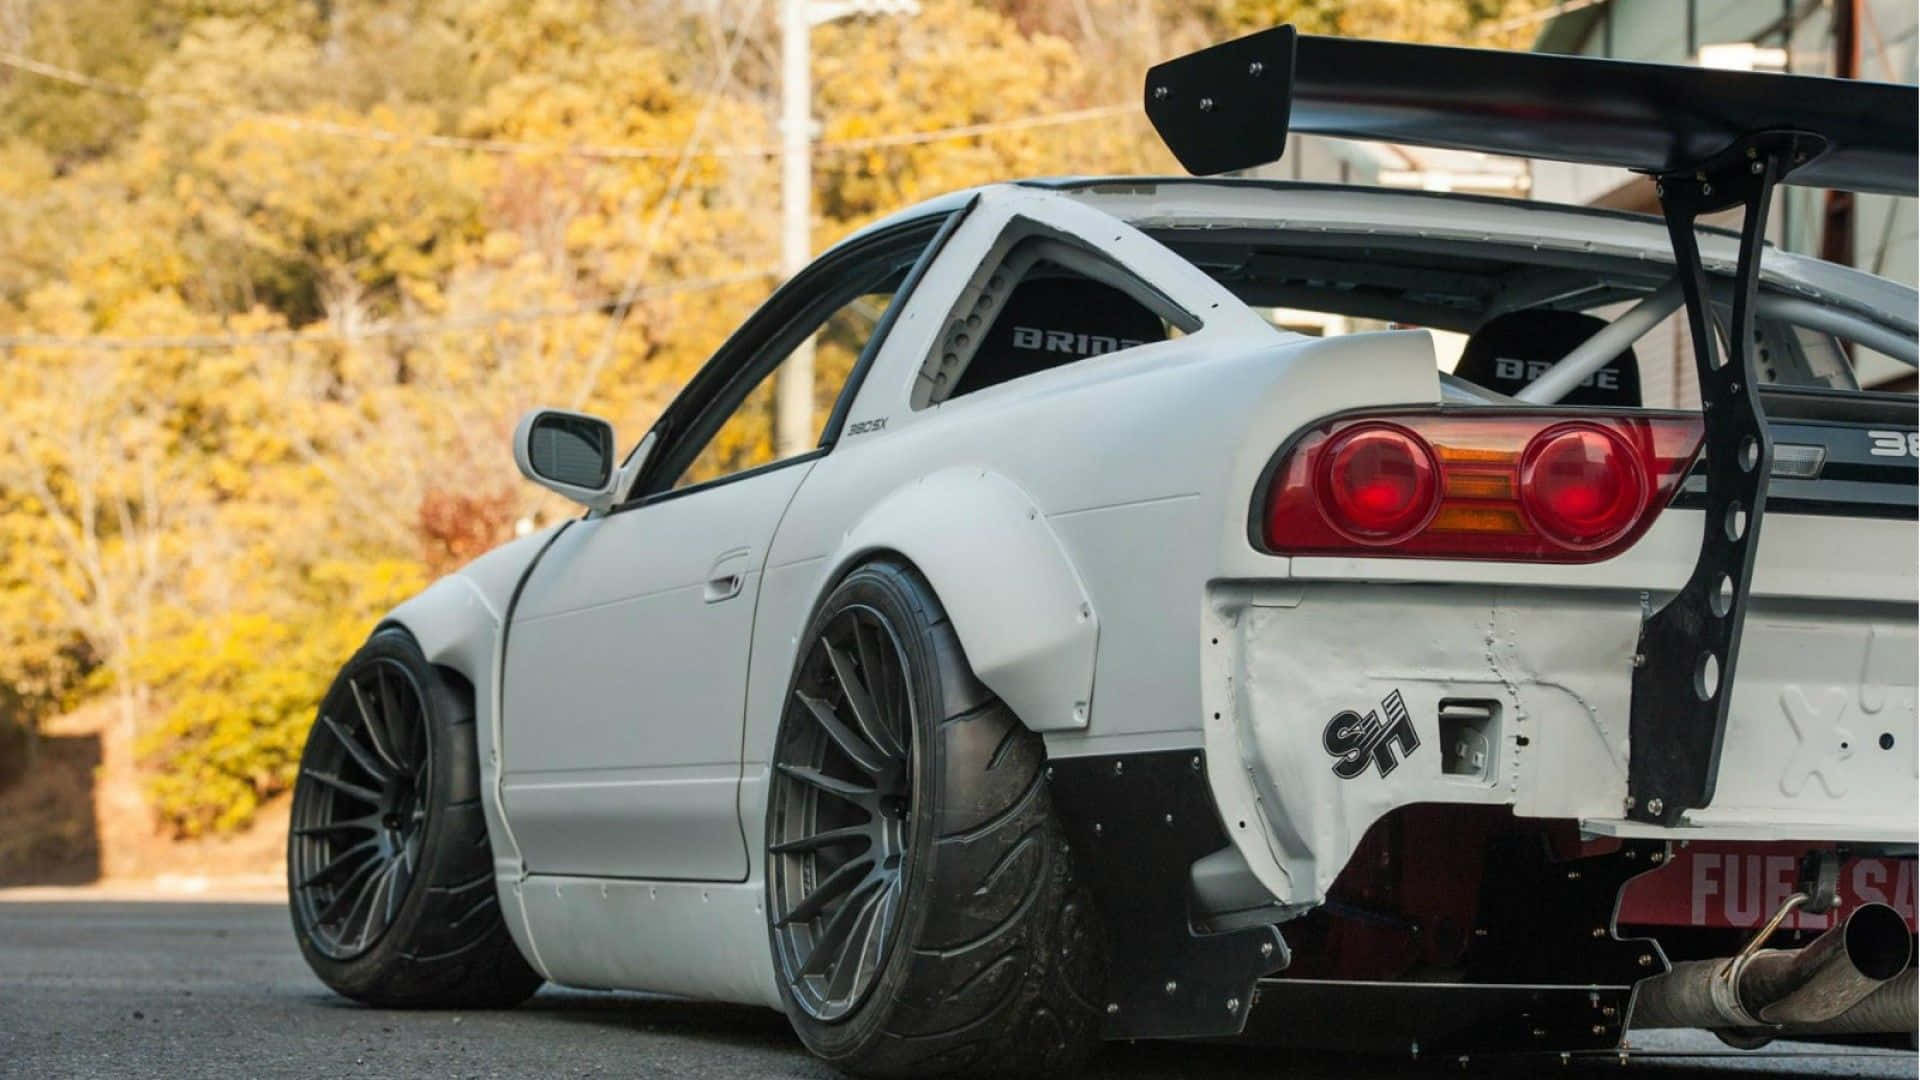 Show off your JDM style with this sleek and stylish stance Wallpaper